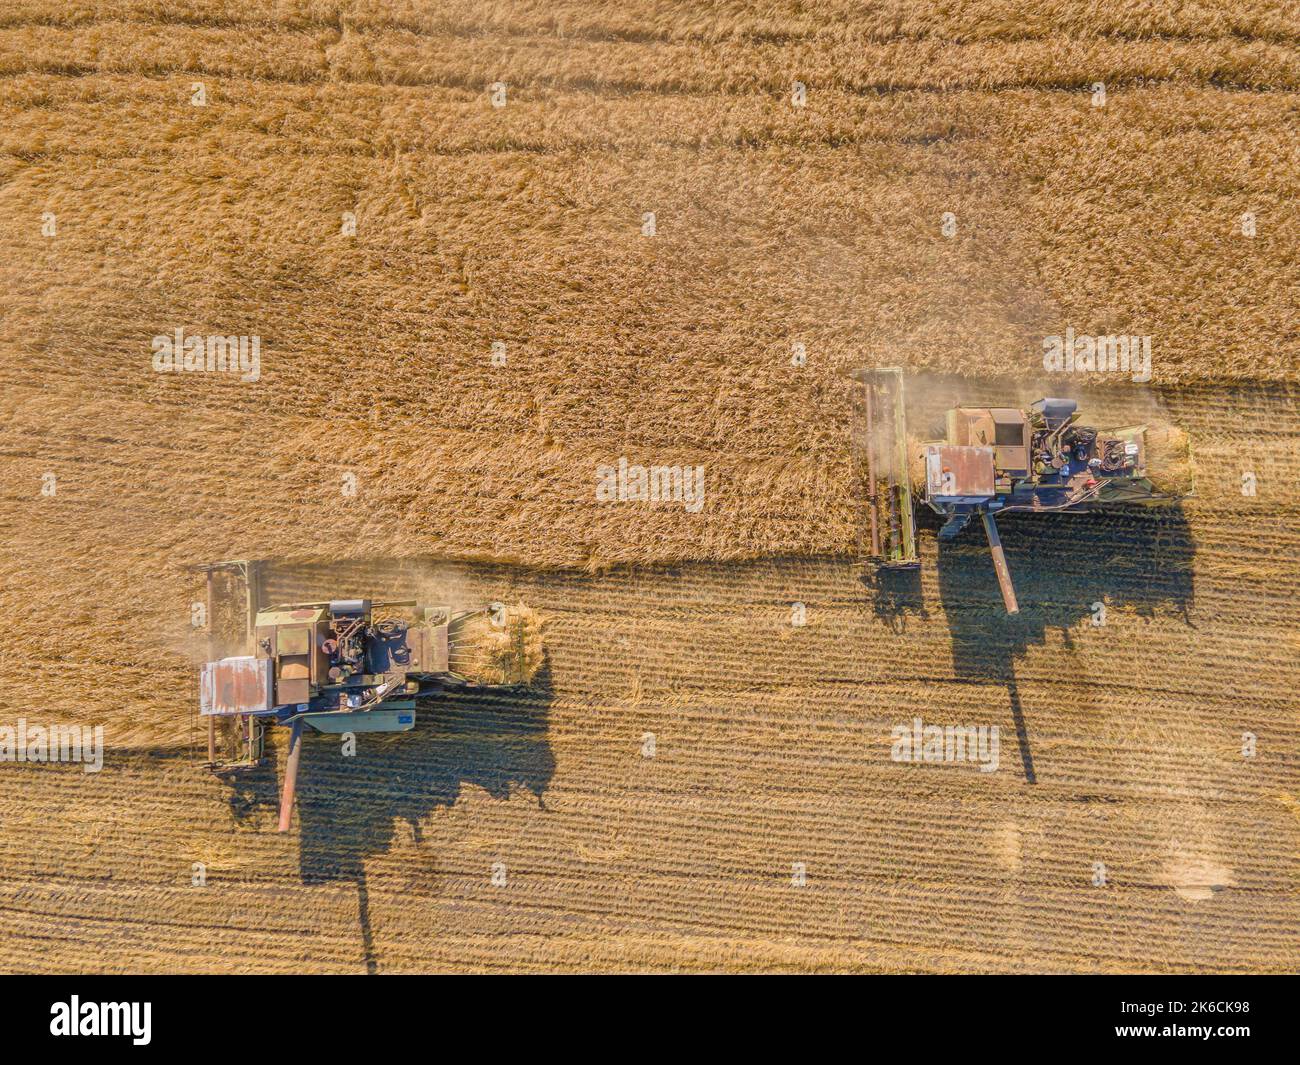 Harvest wheat grain and crop aerial view.Harvesting wheat,oats, barley in fields,ranches and farmlands.Combines mow in the field.Agro-industry.Combine Stock Photo